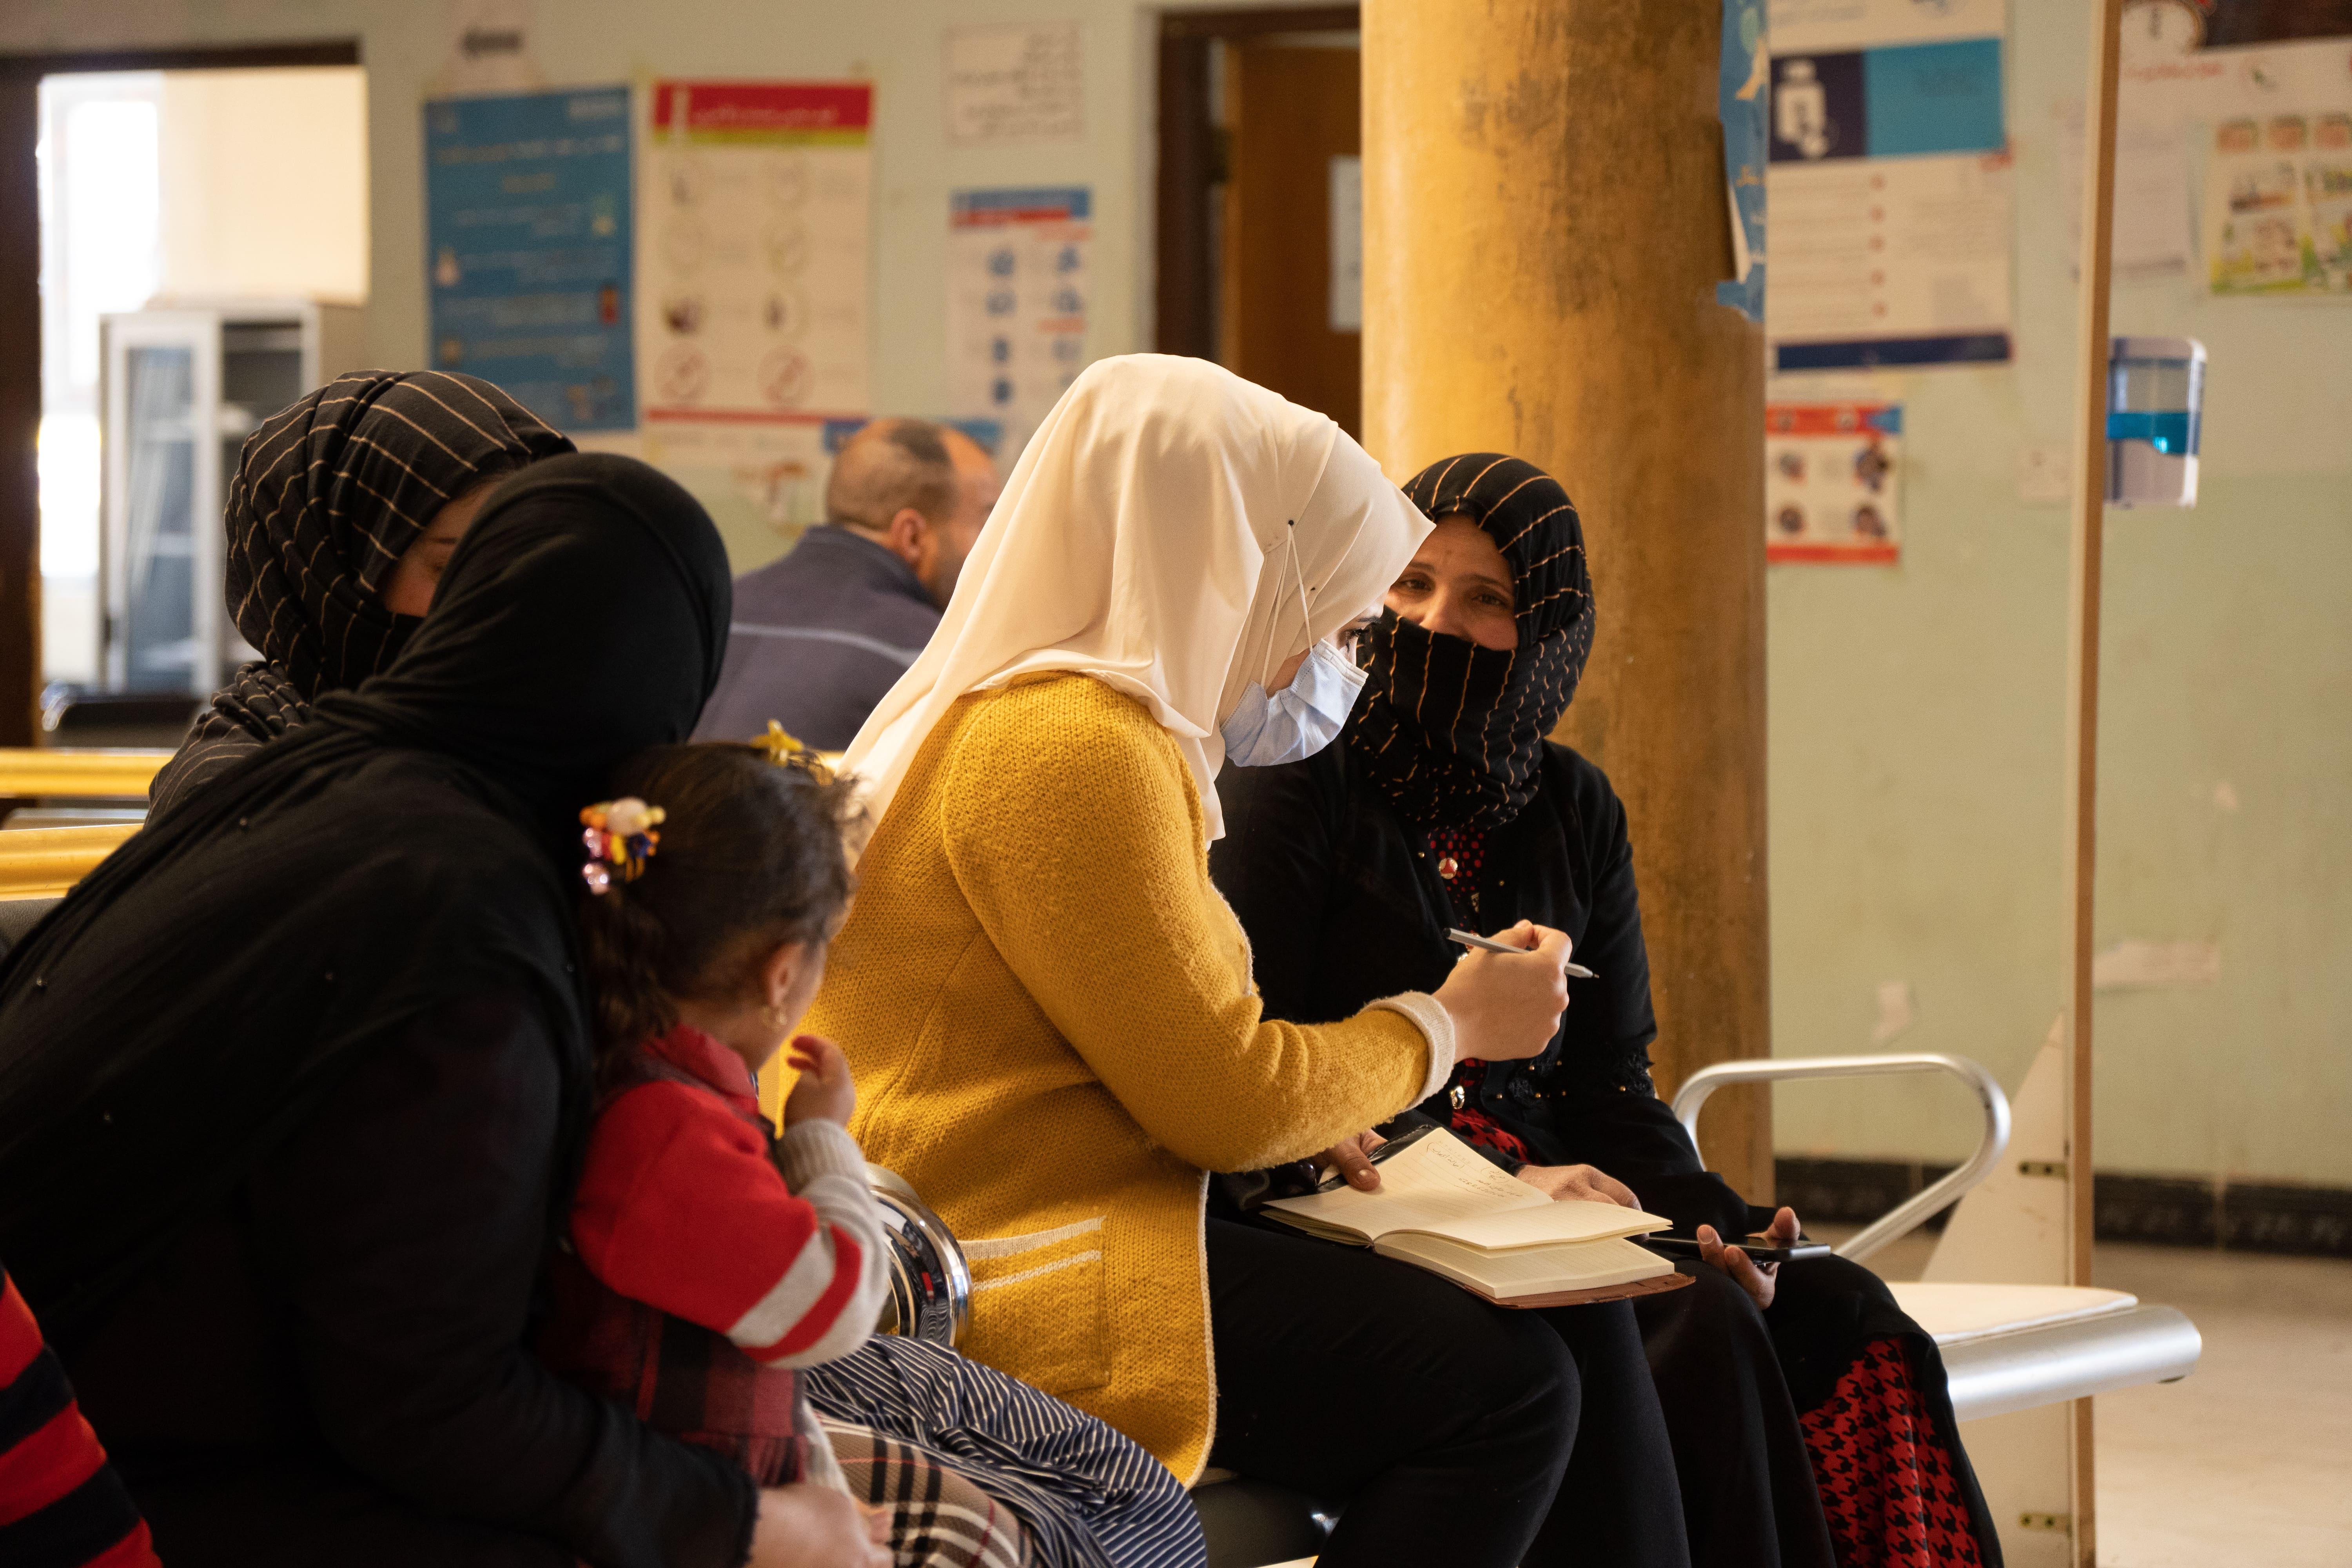 Medical Care in Iraq: An MSF community mental health worker conducting a health promotion session with a group of women and their children in Hawija